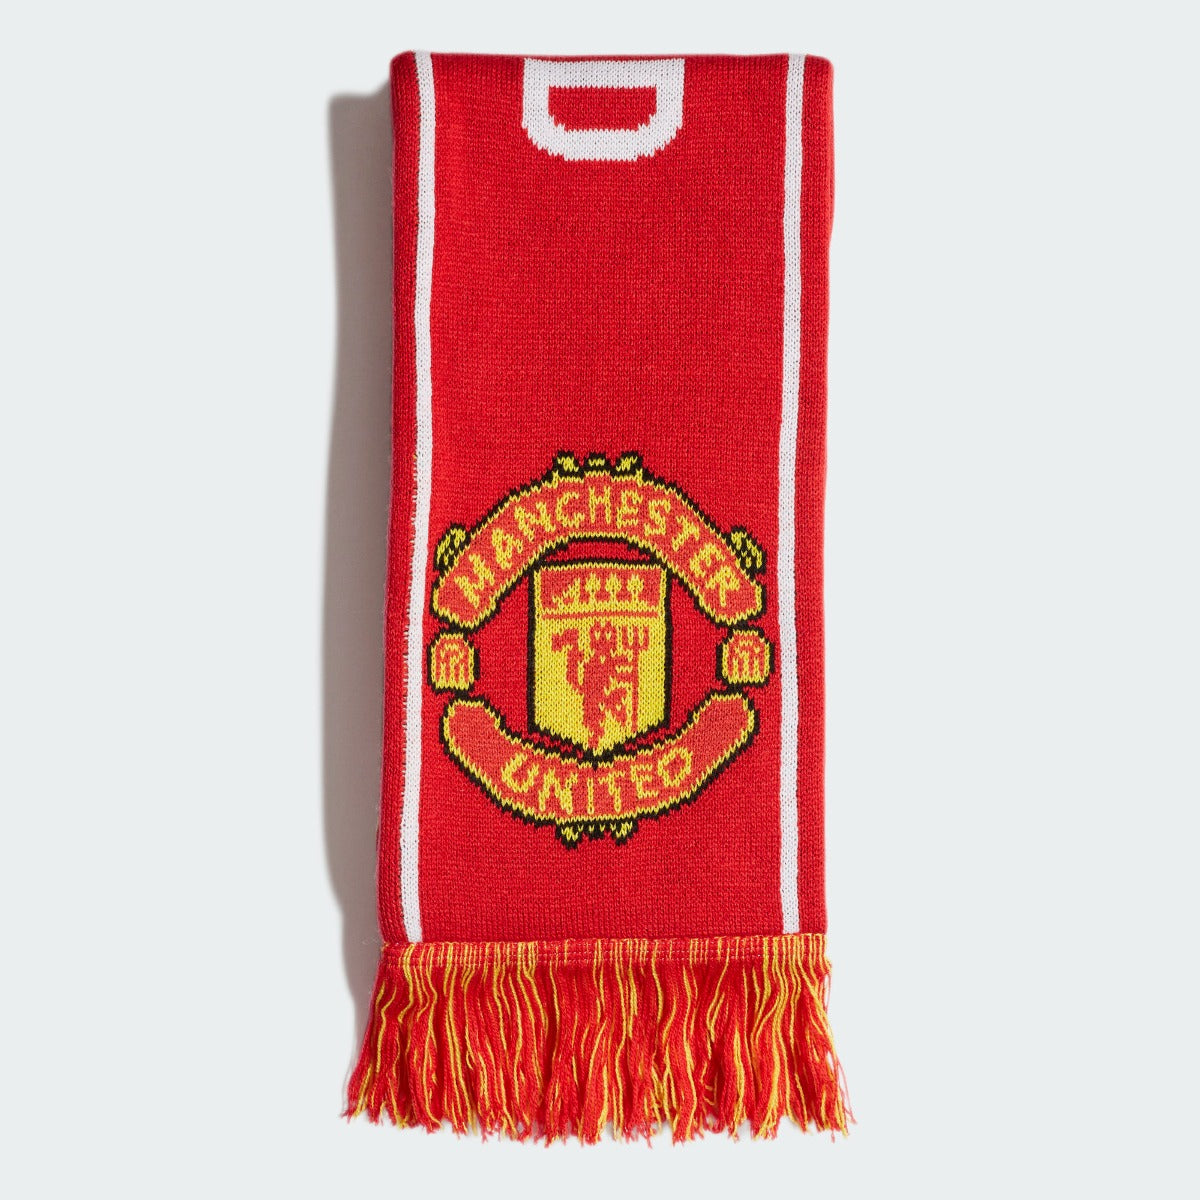 Adidas 2021-22 Manchester United Scarf - Red-White (Main)